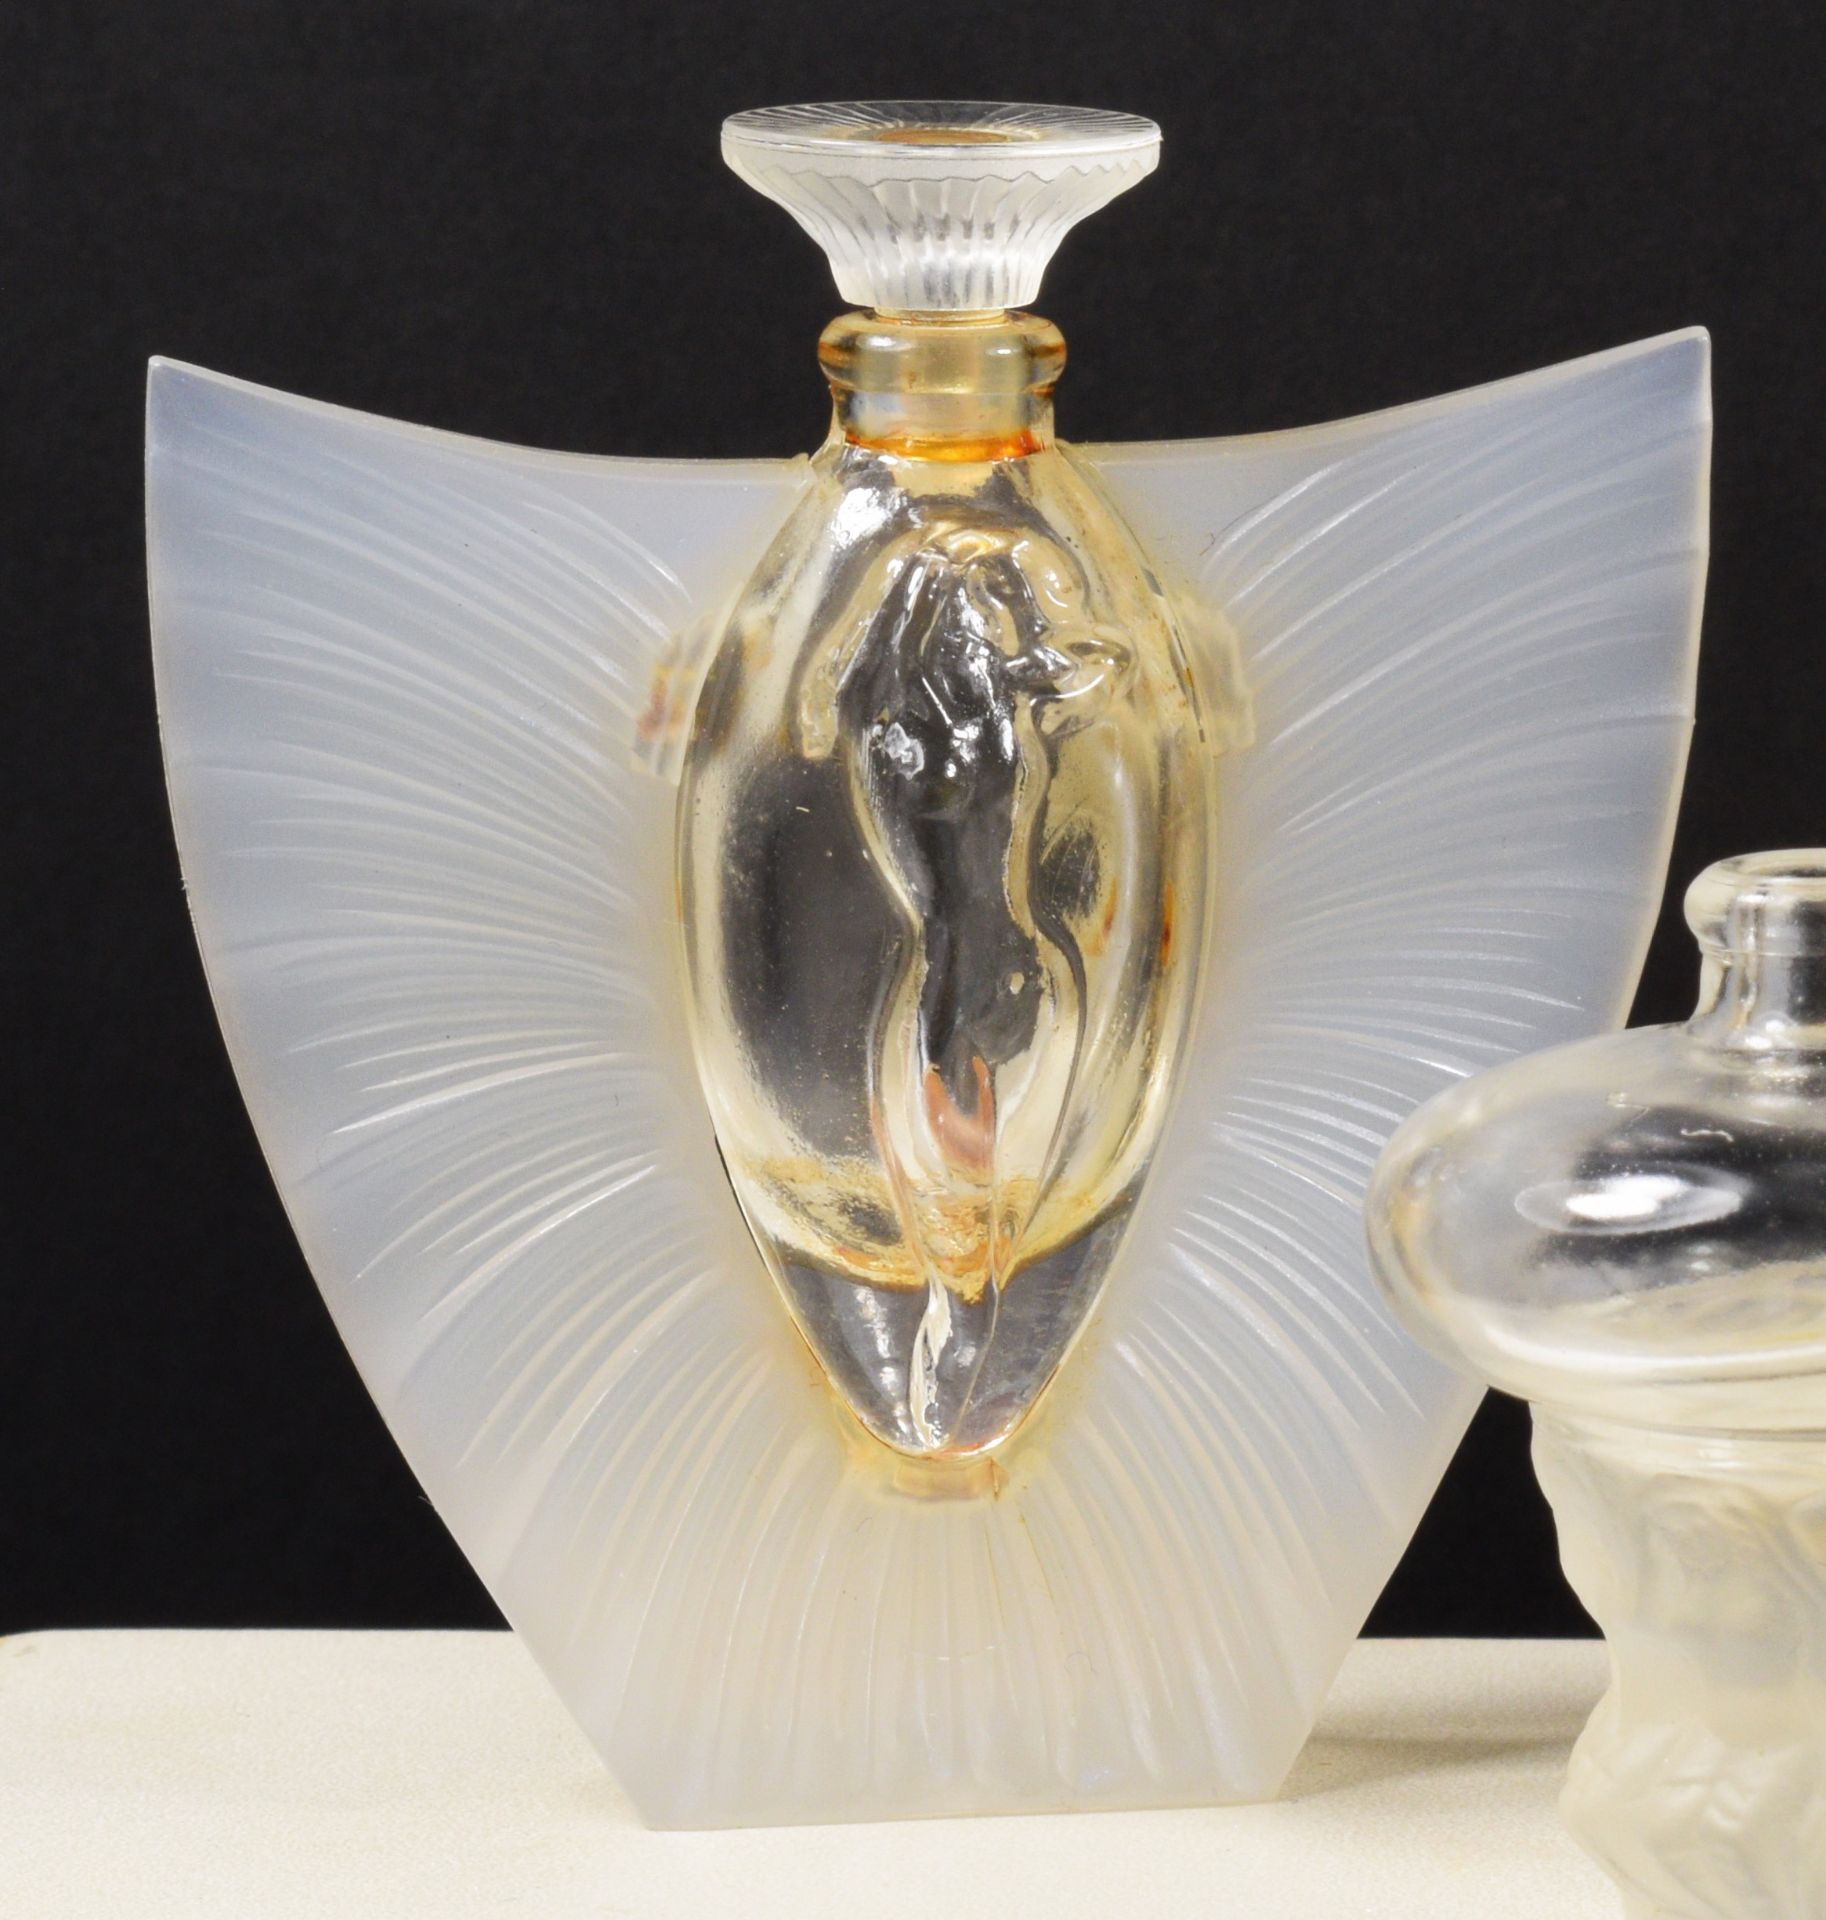 Lalique "Les Flacons Miniatures", perfume bottles, 1998, 1999, 2000 edition, cased with display card - Image 5 of 9